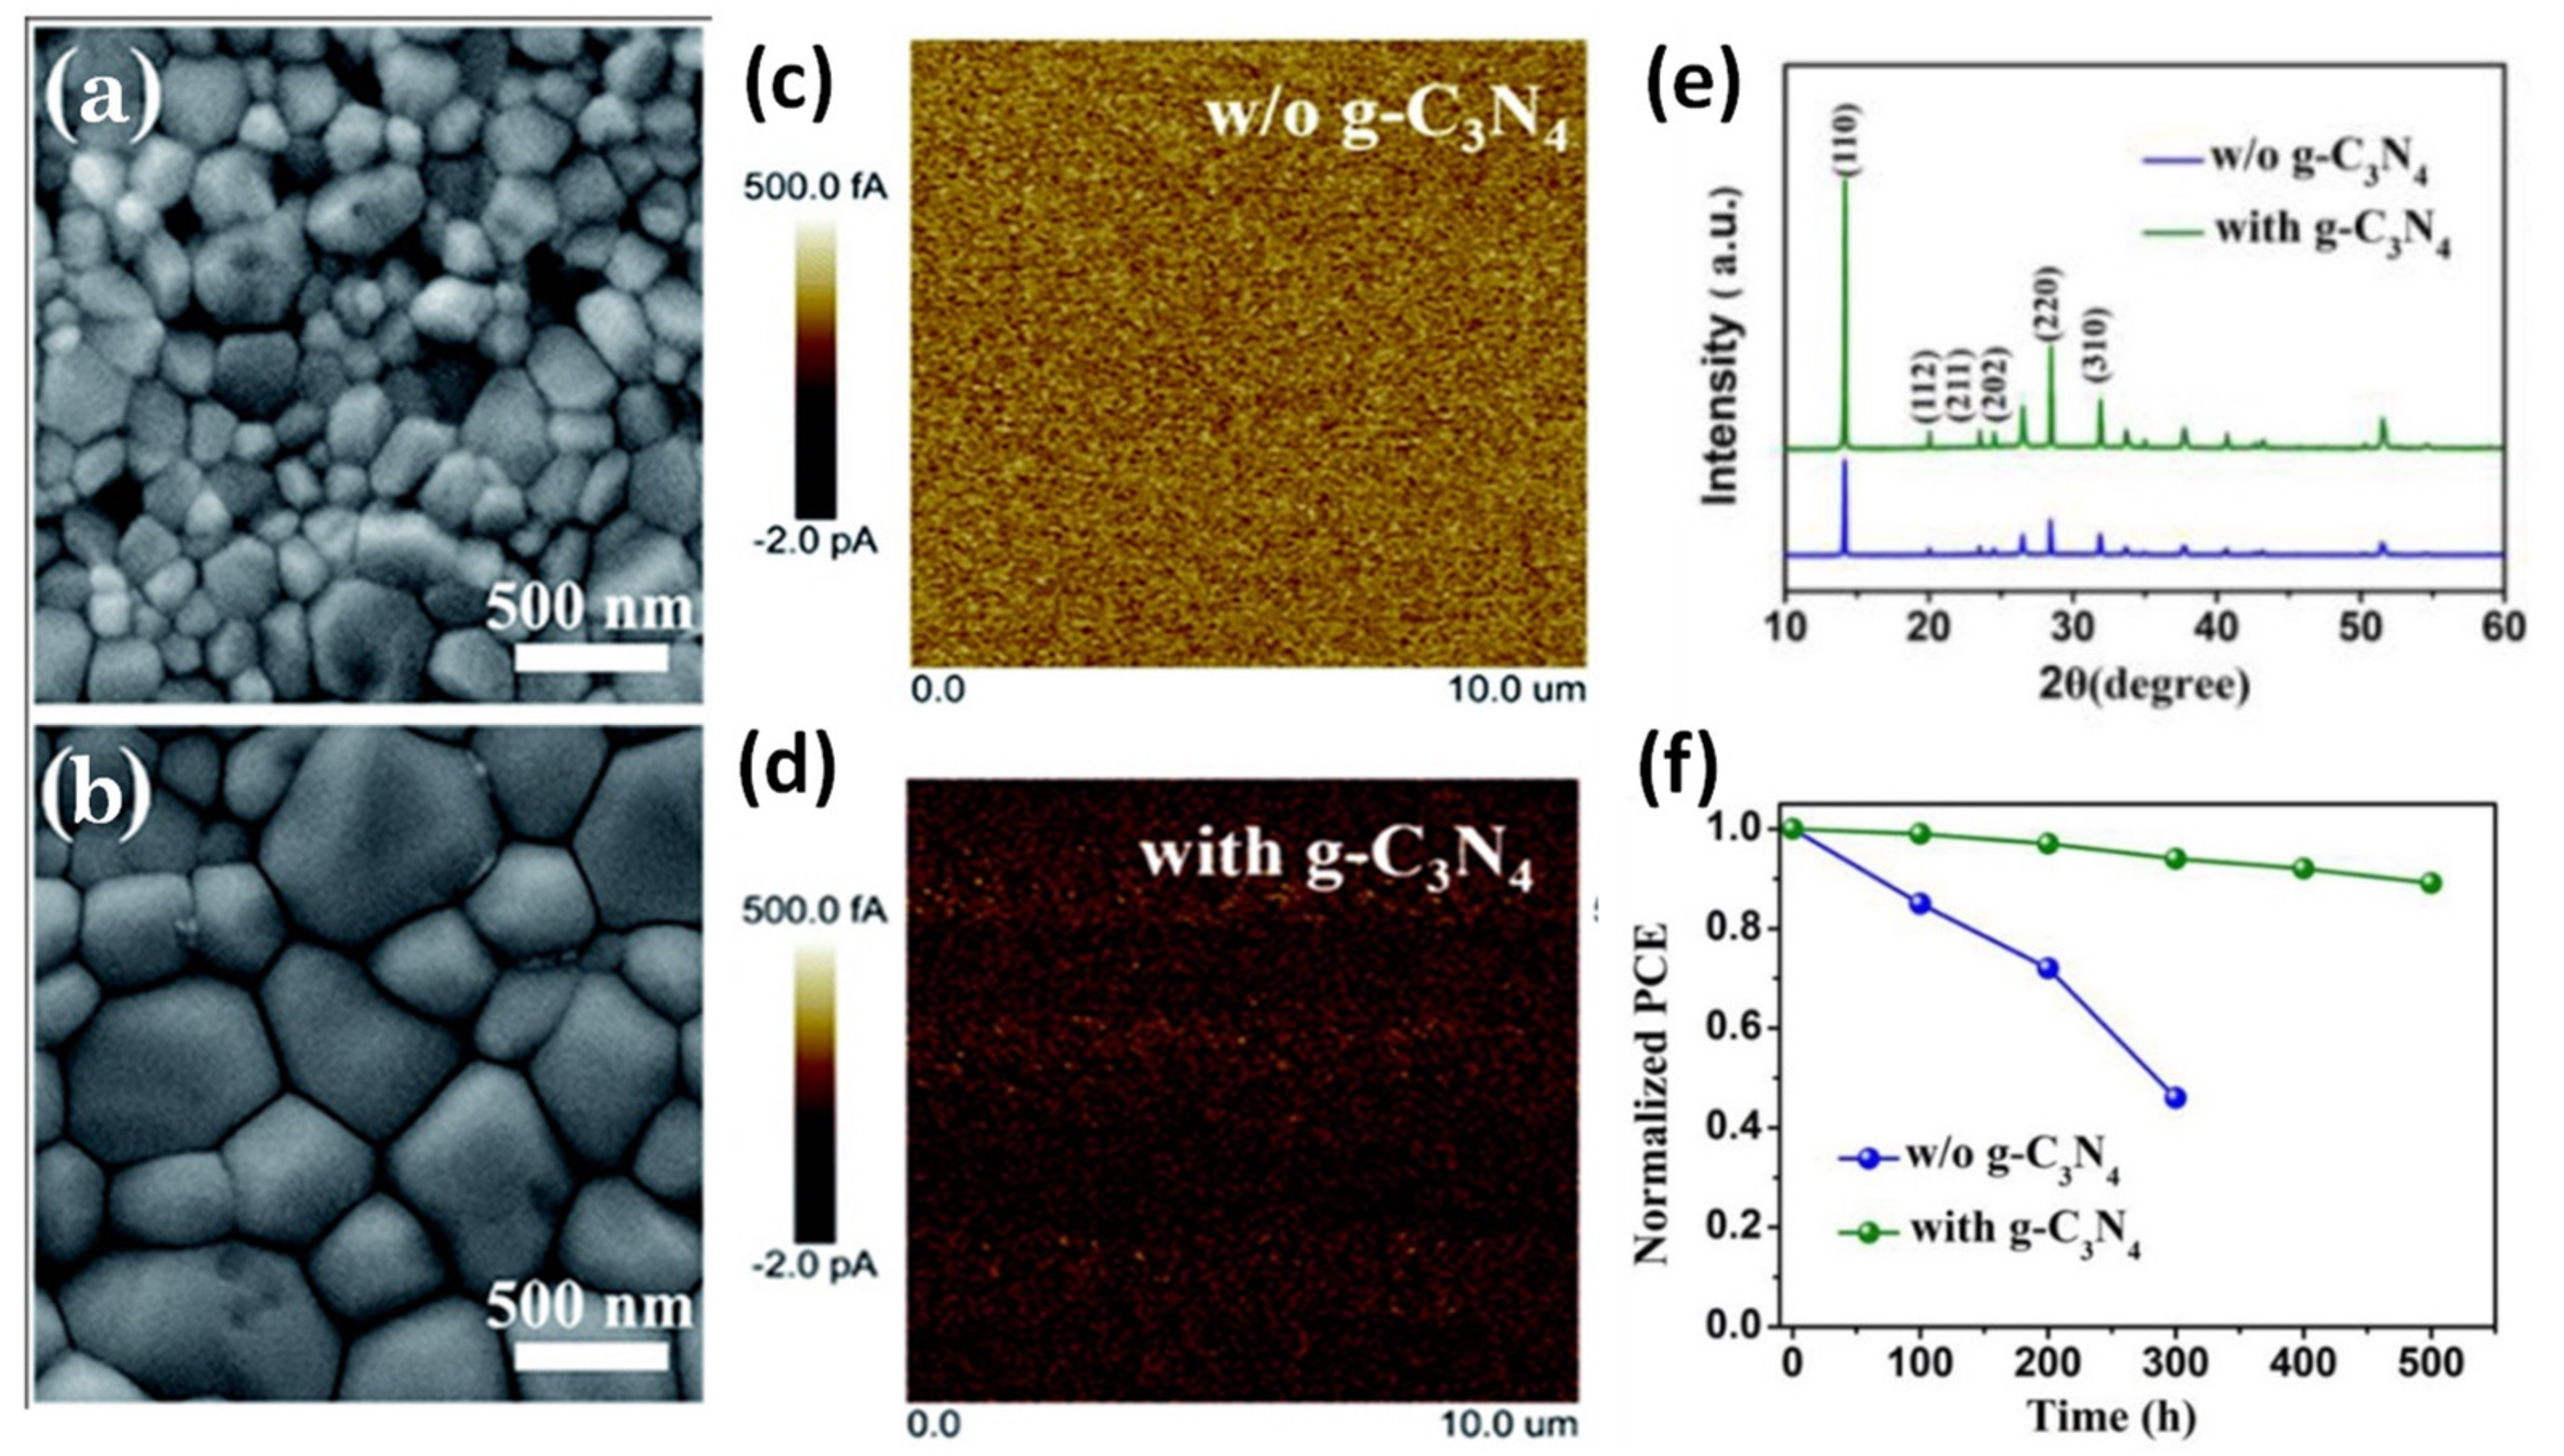 Materials Free Full Text A Review On Emerging Efficient And Stable Perovskite Solar Cells Based On G C3n4 Nanostructures Html